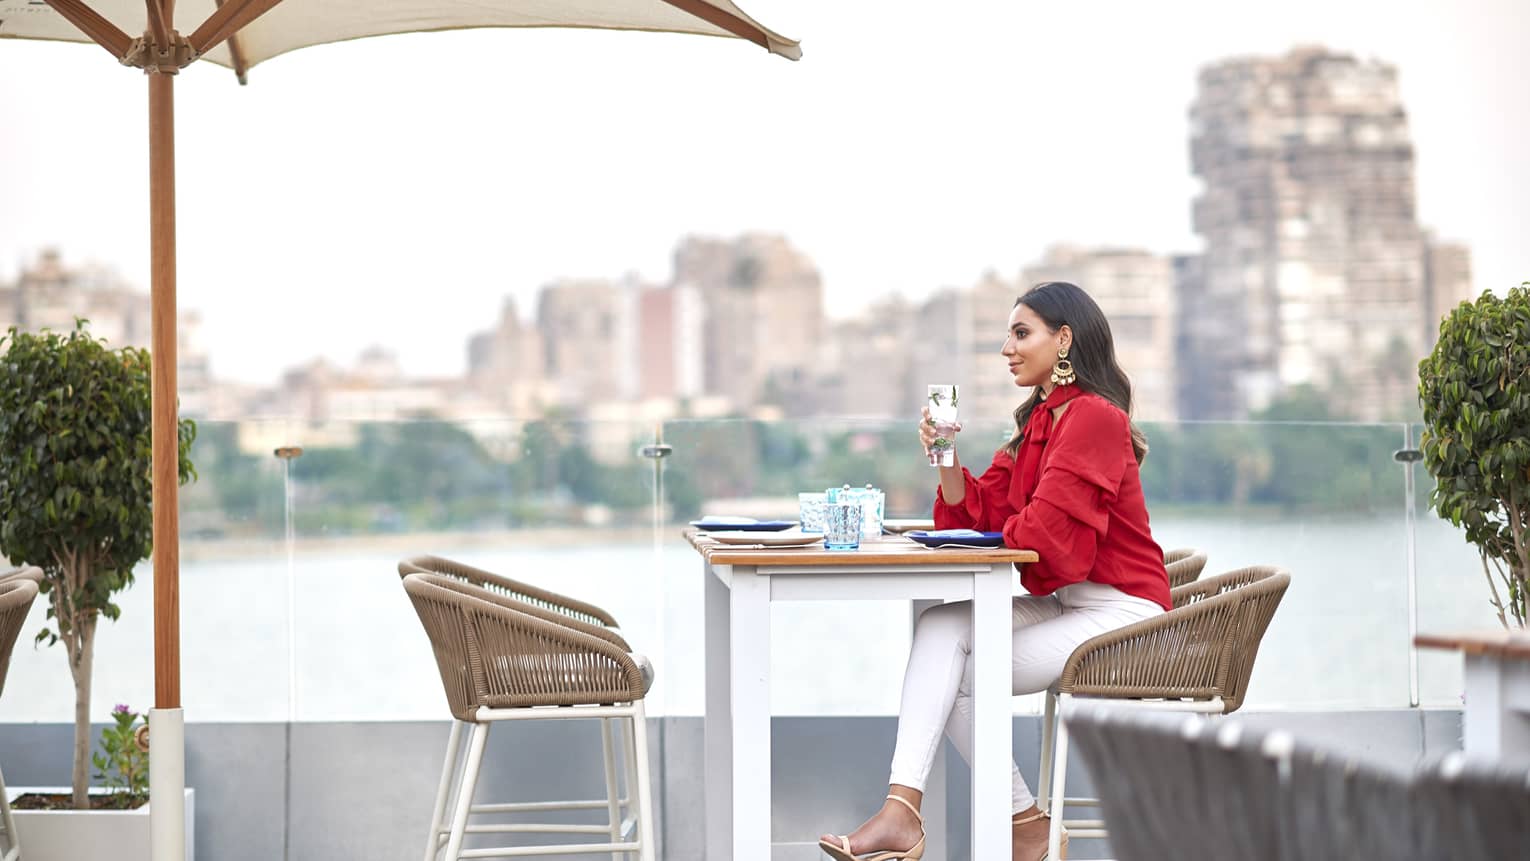 Closeup of woman in red shirt seated at table on Zoe terrace, holding a drink, Nile and city views